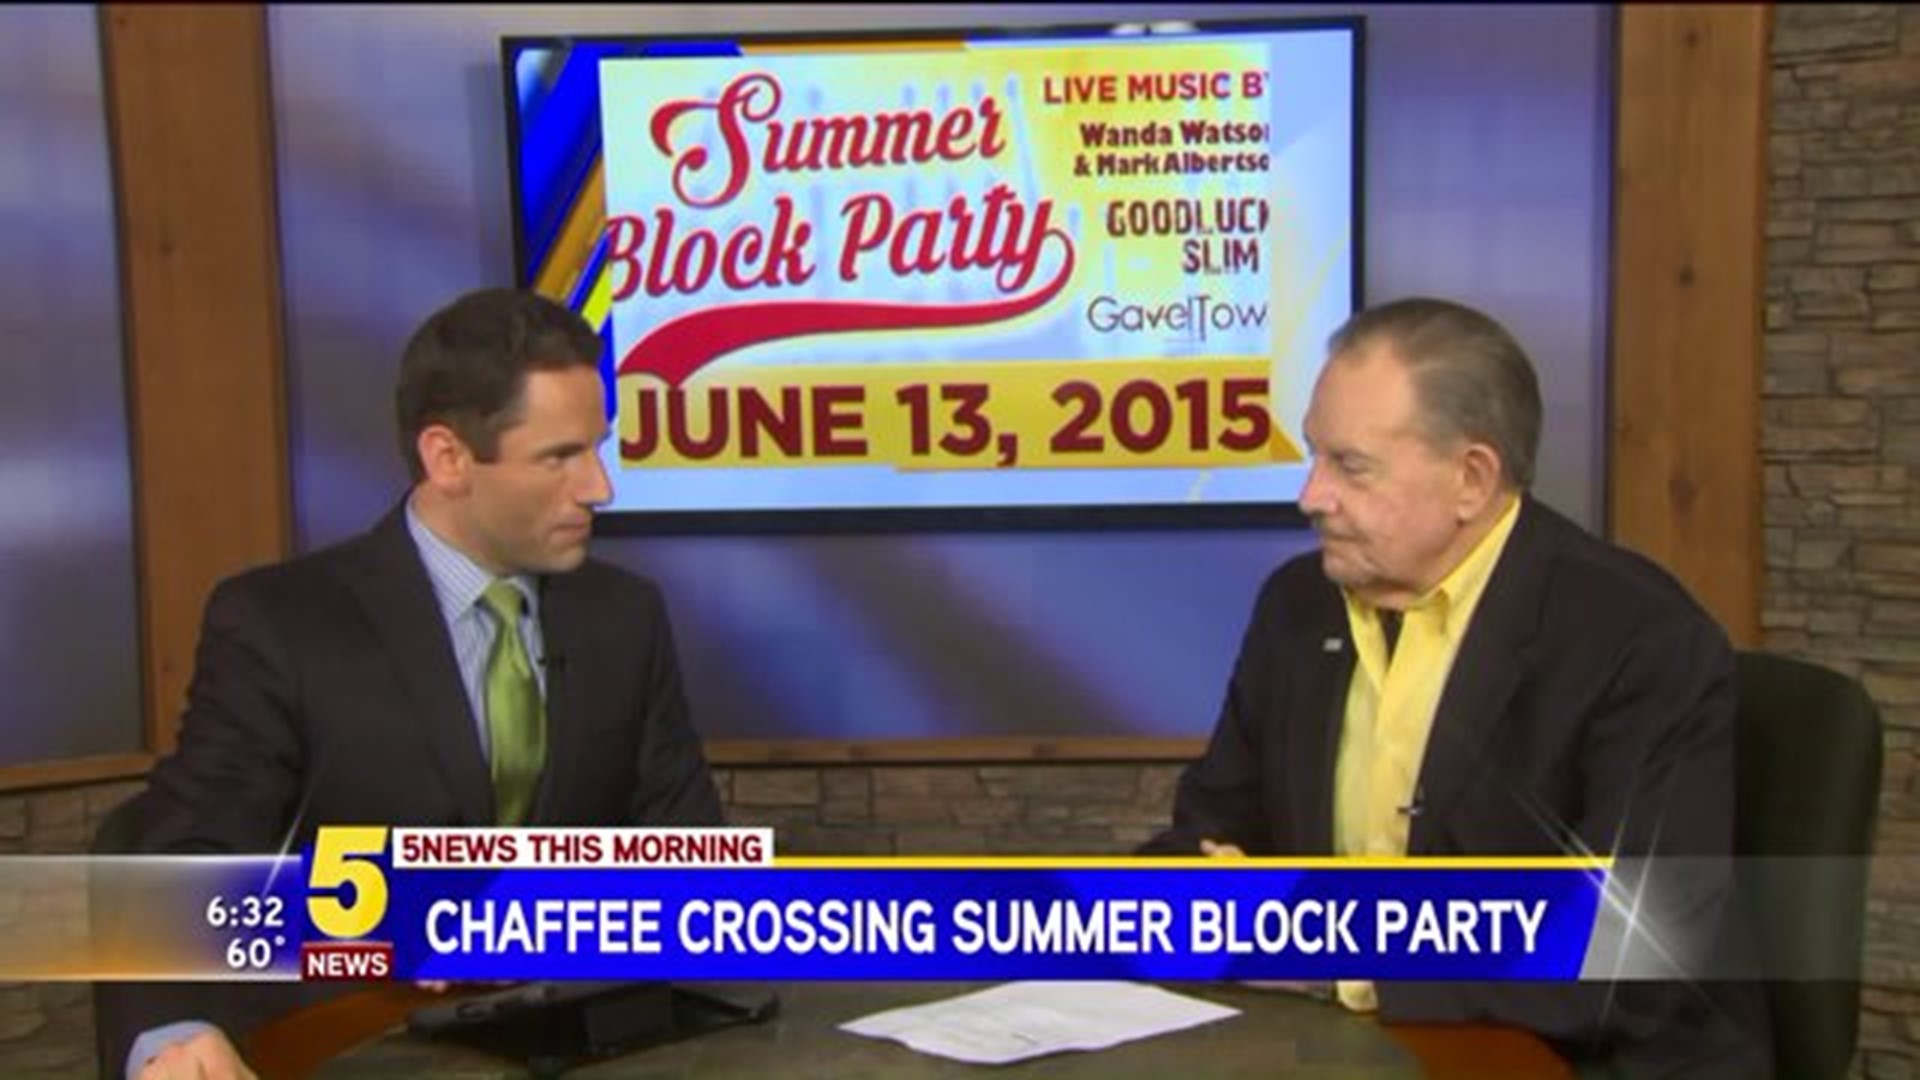 Summer Block Party In Chaffee Crossing